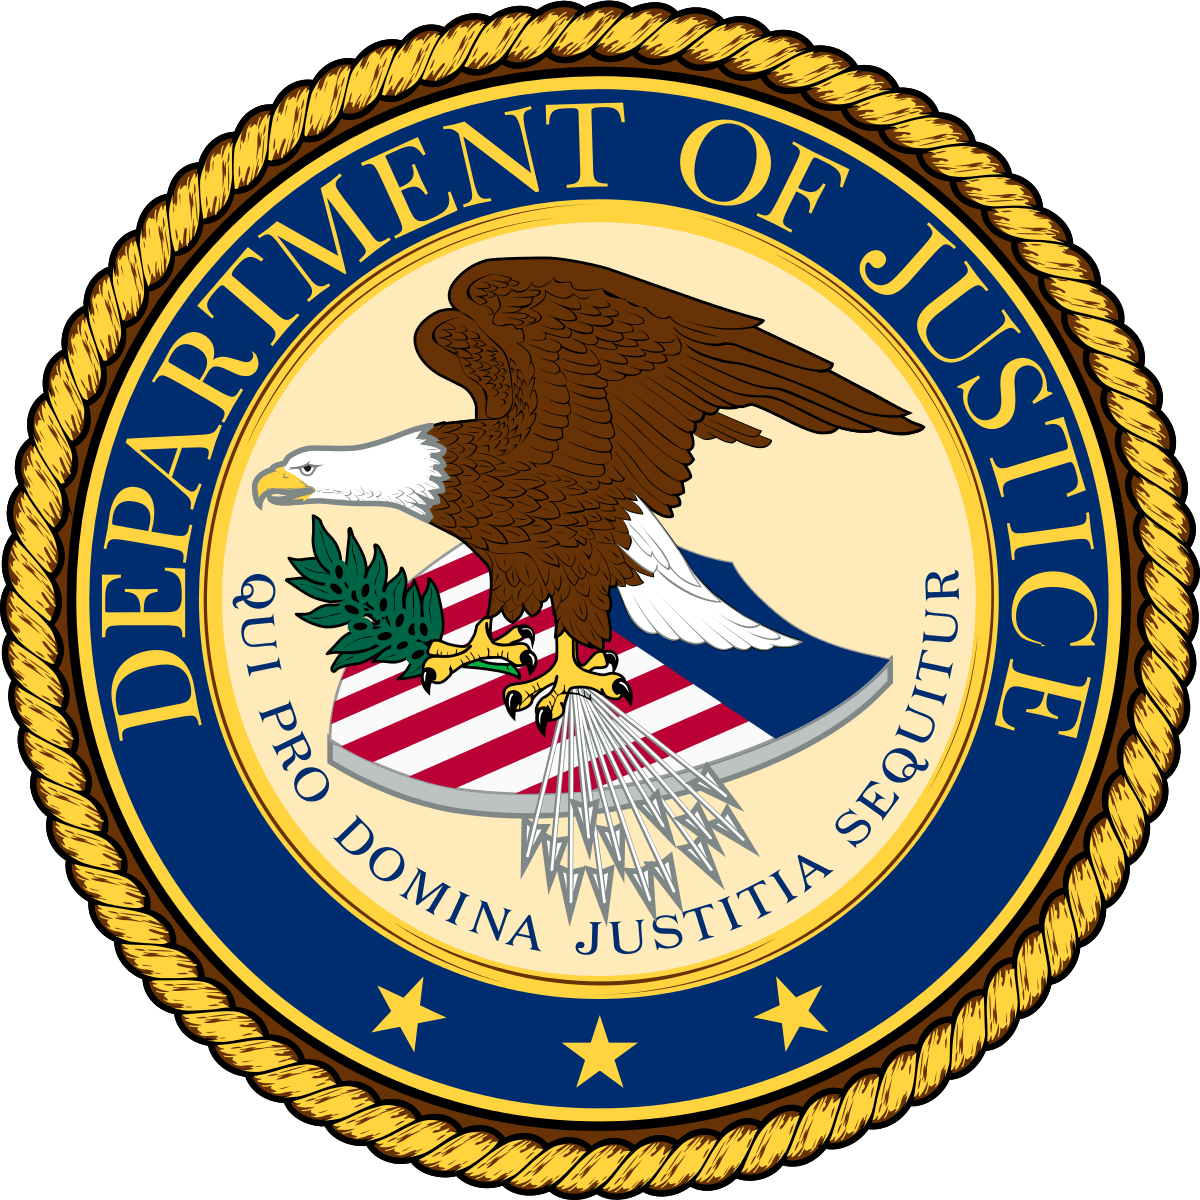 The Department Logo - United States Department of Justice